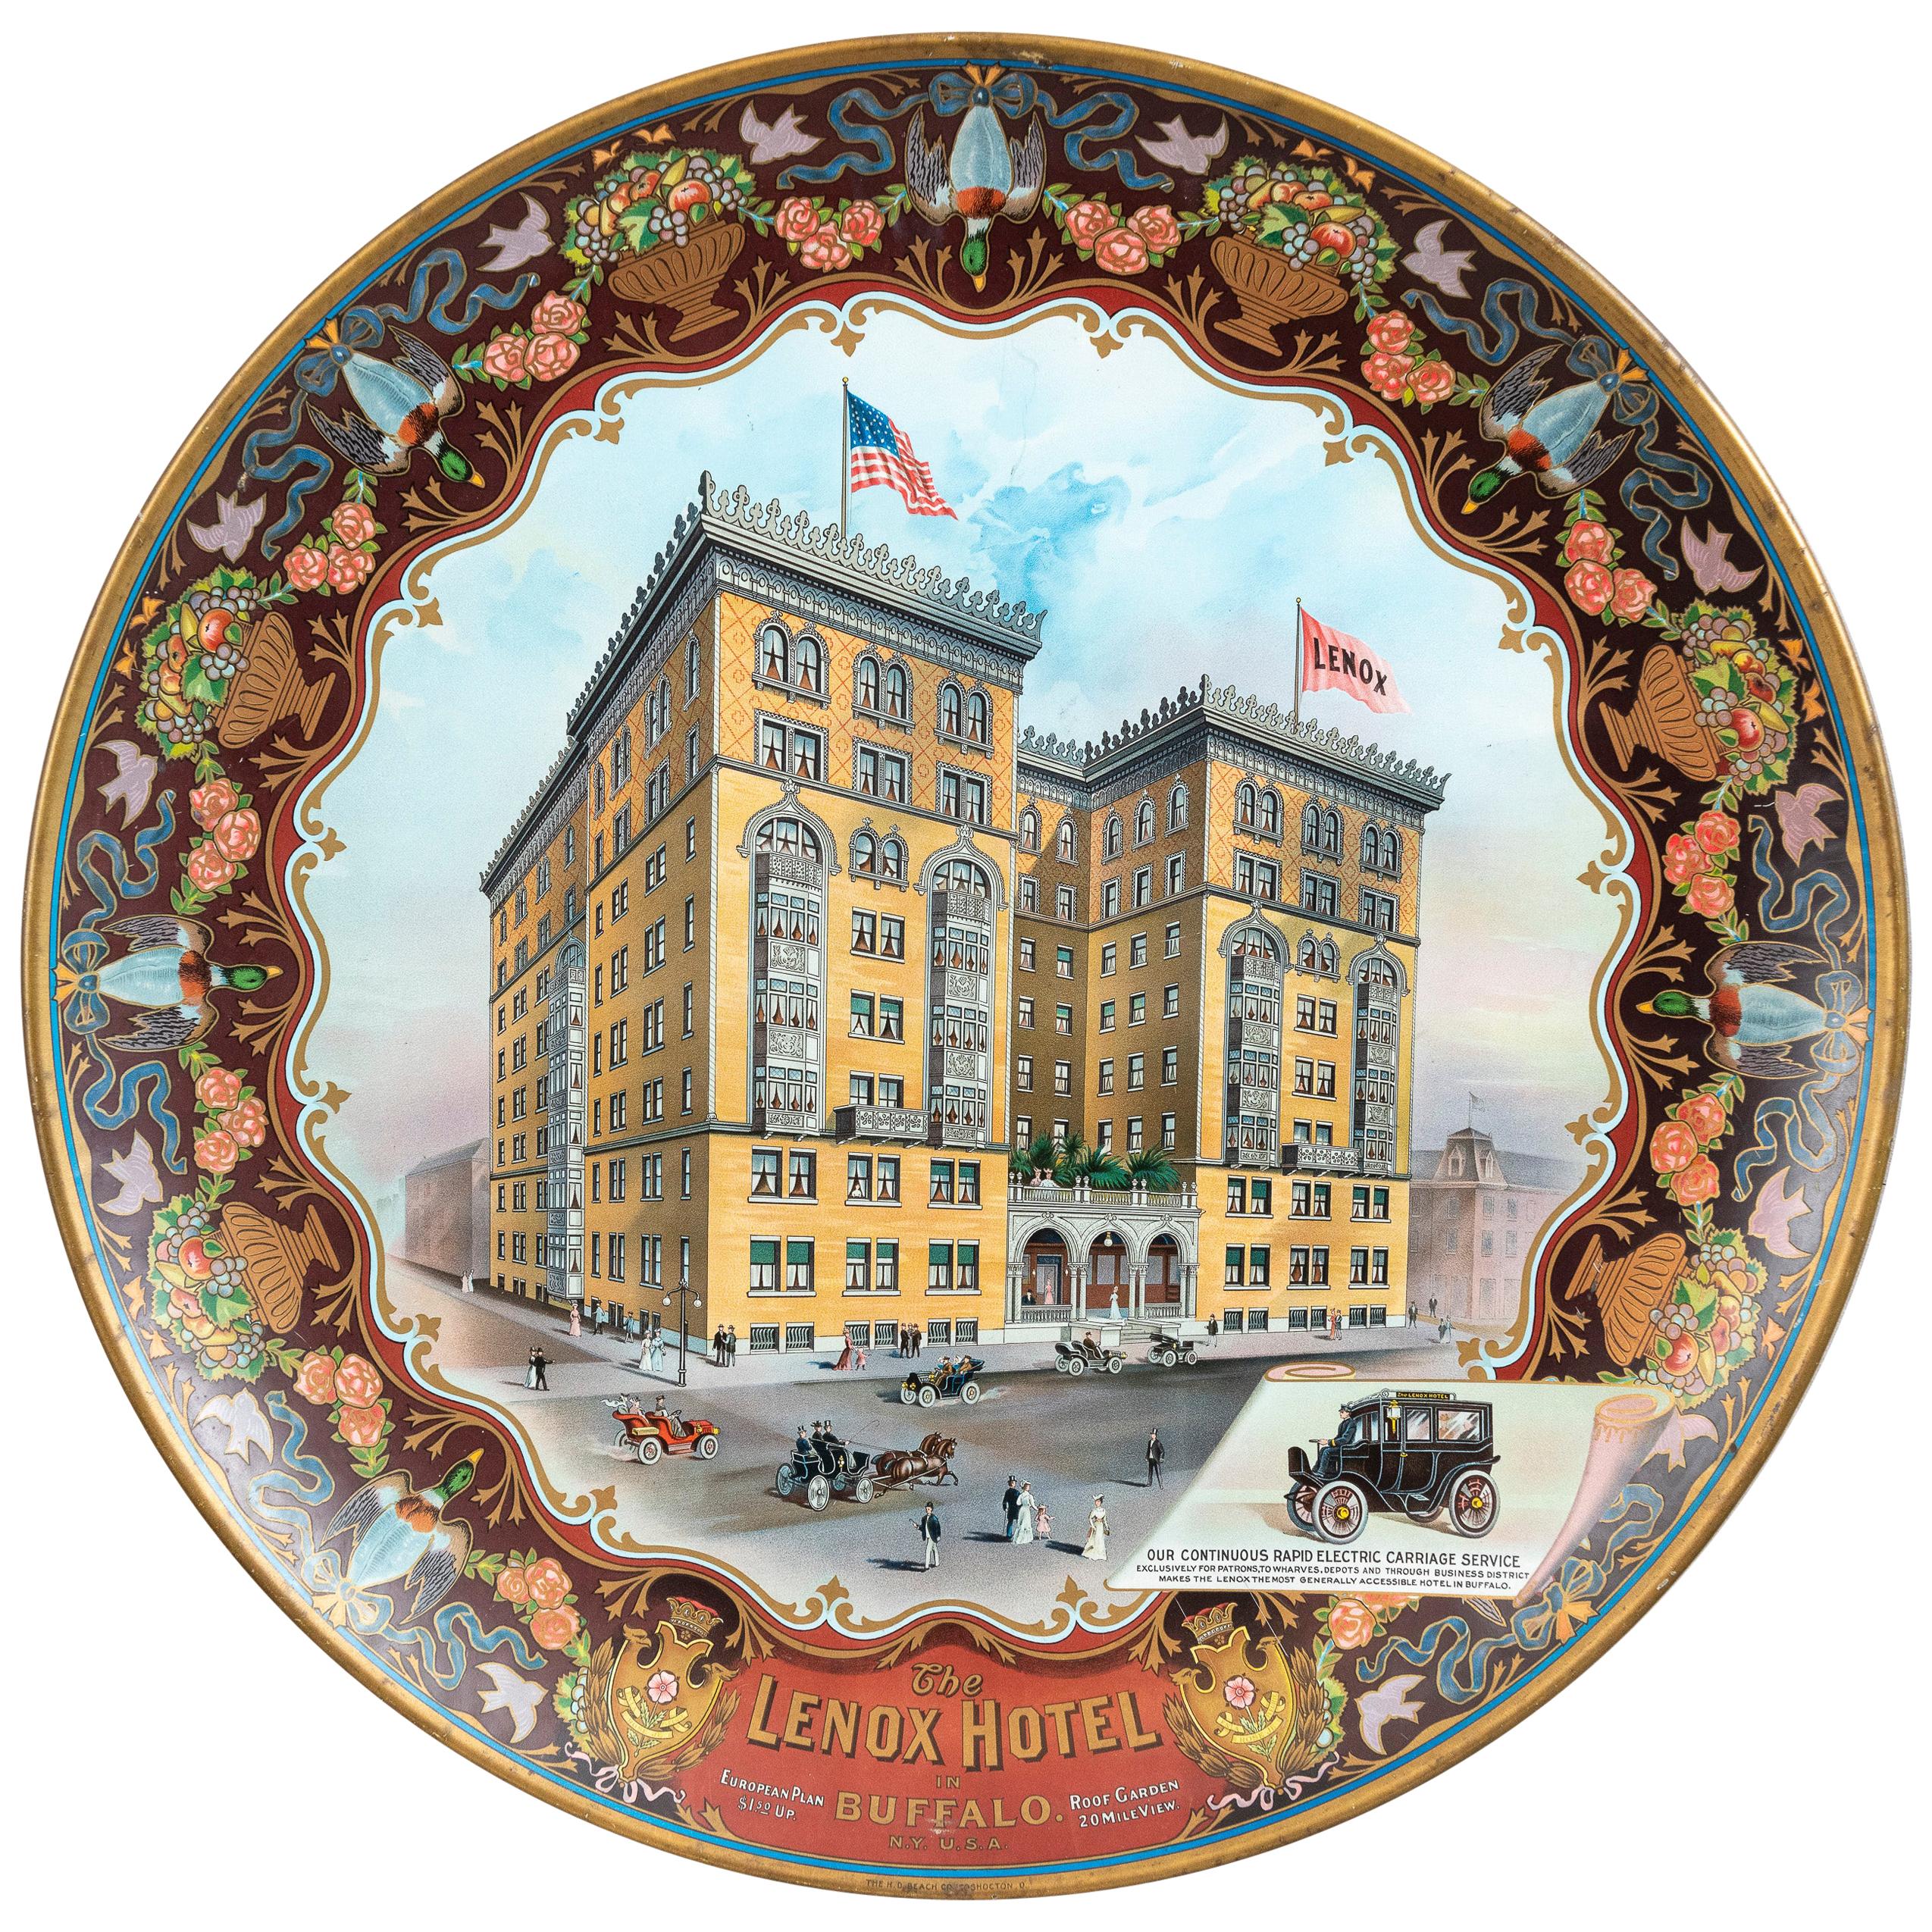 Antique Tin Charger Advertising Sign, Lenox Hotel Buffalo N.Y, ca. 1910